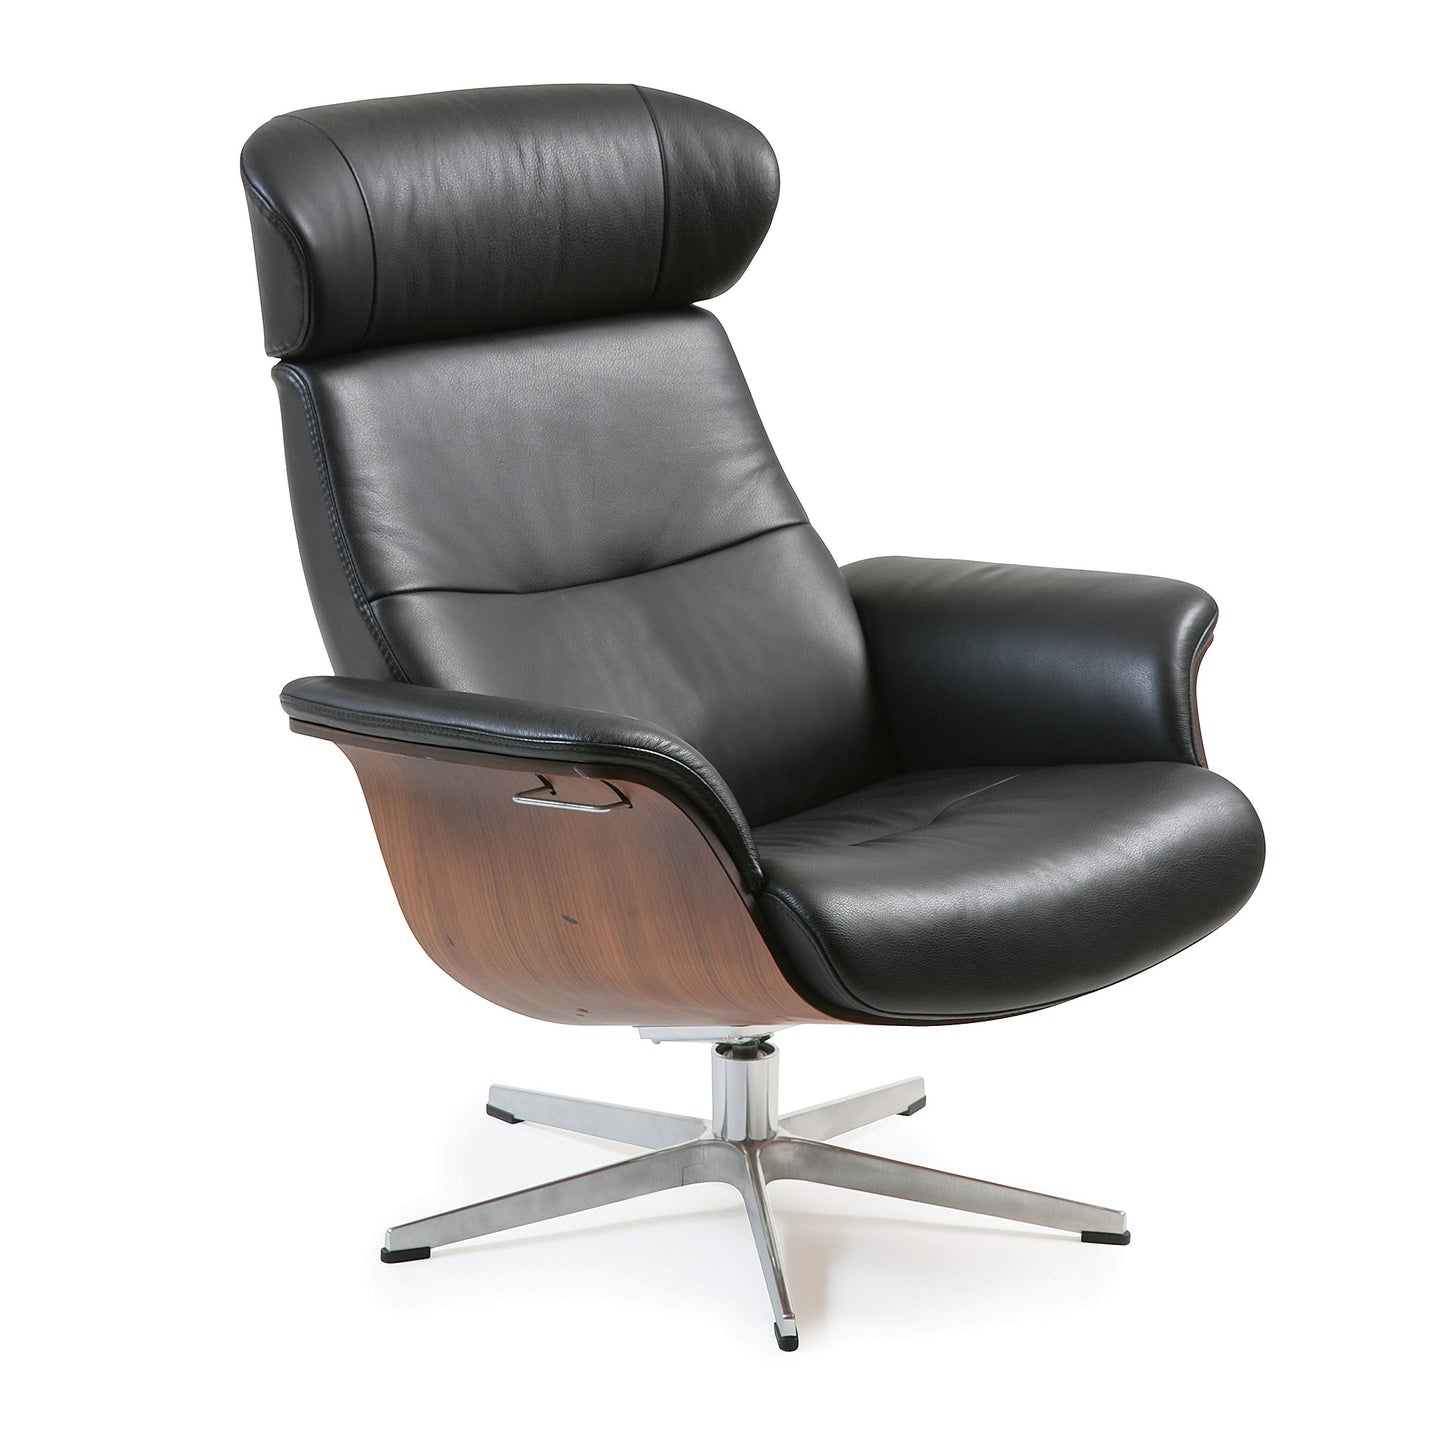 Conform Recliner Timeout in Black Leather with Footstool